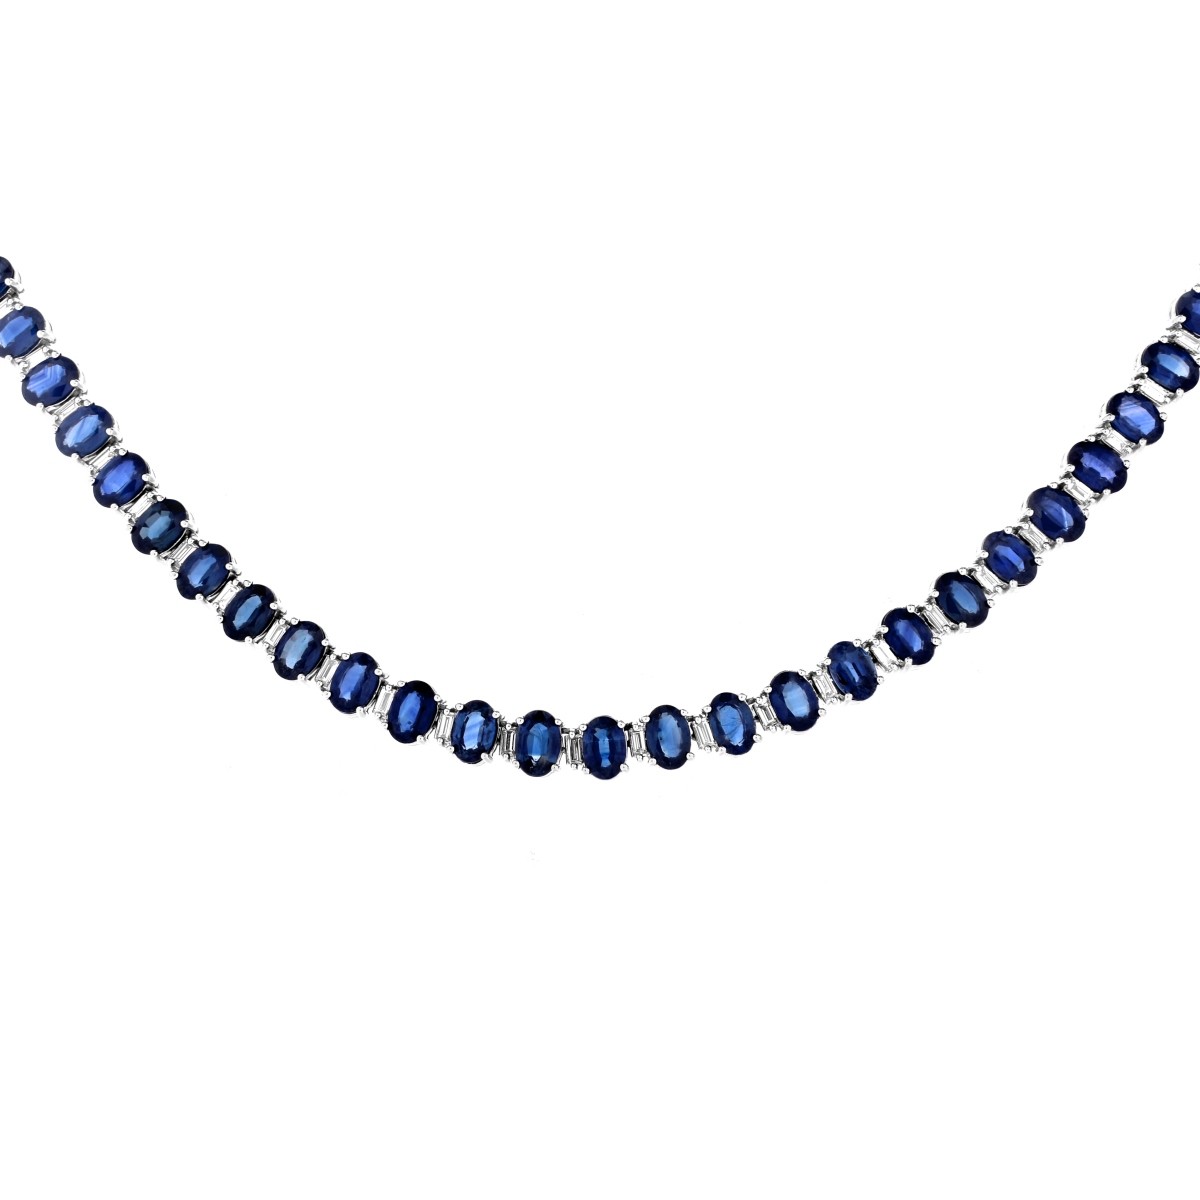 50.0ct Sapphire, Diamond and 18K Gold Necklace